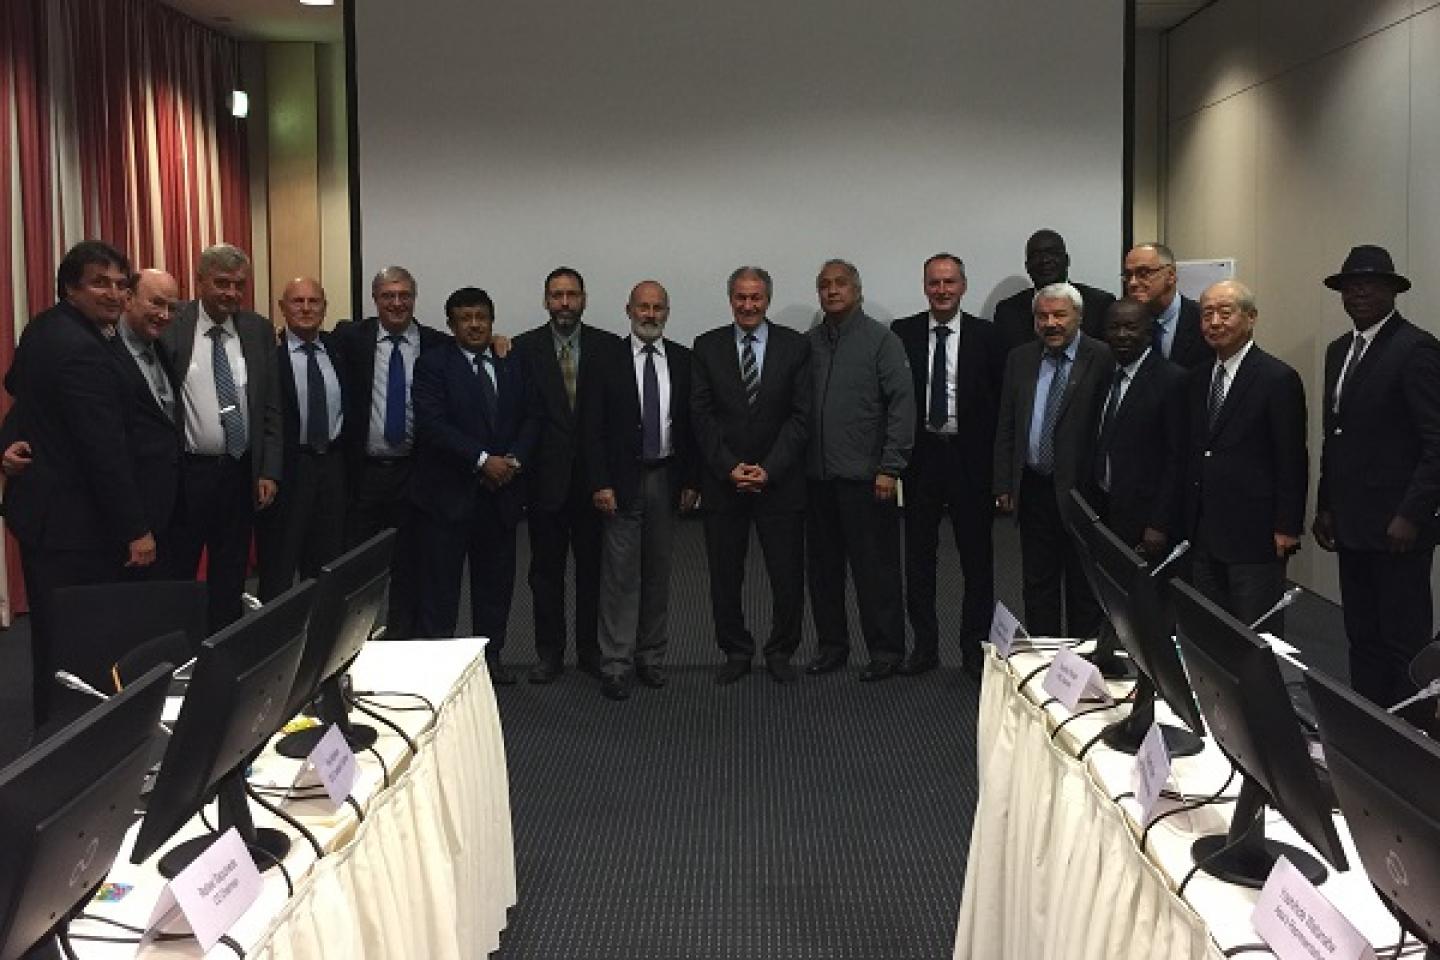 IHF Council and Executive Committee Meetings in Germany